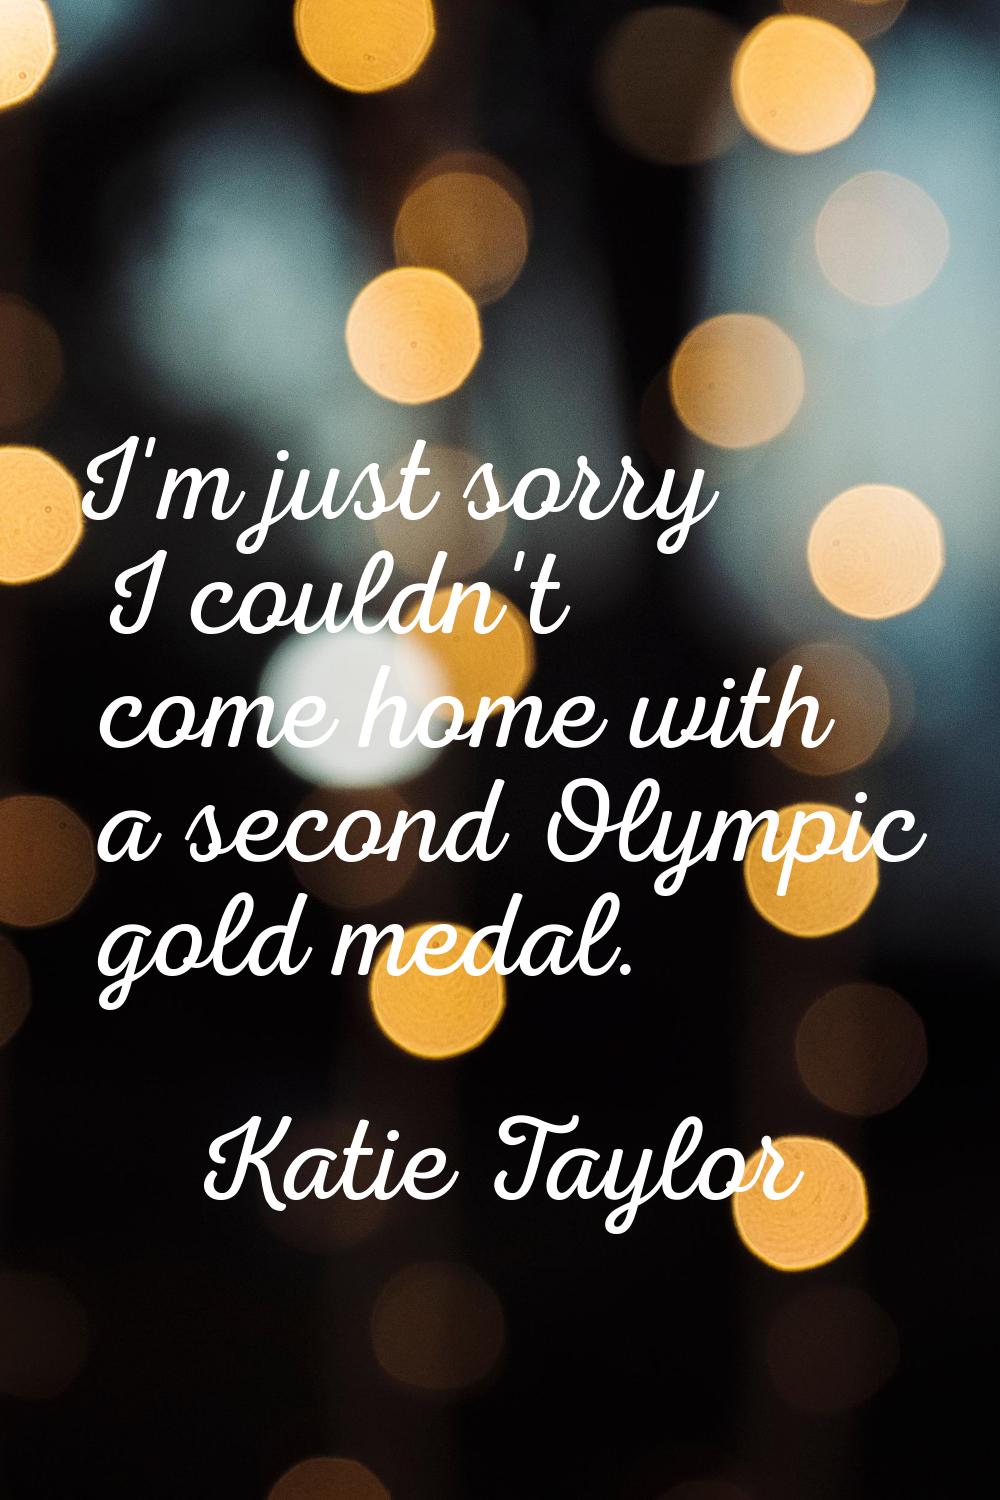 I'm just sorry I couldn't come home with a second Olympic gold medal.